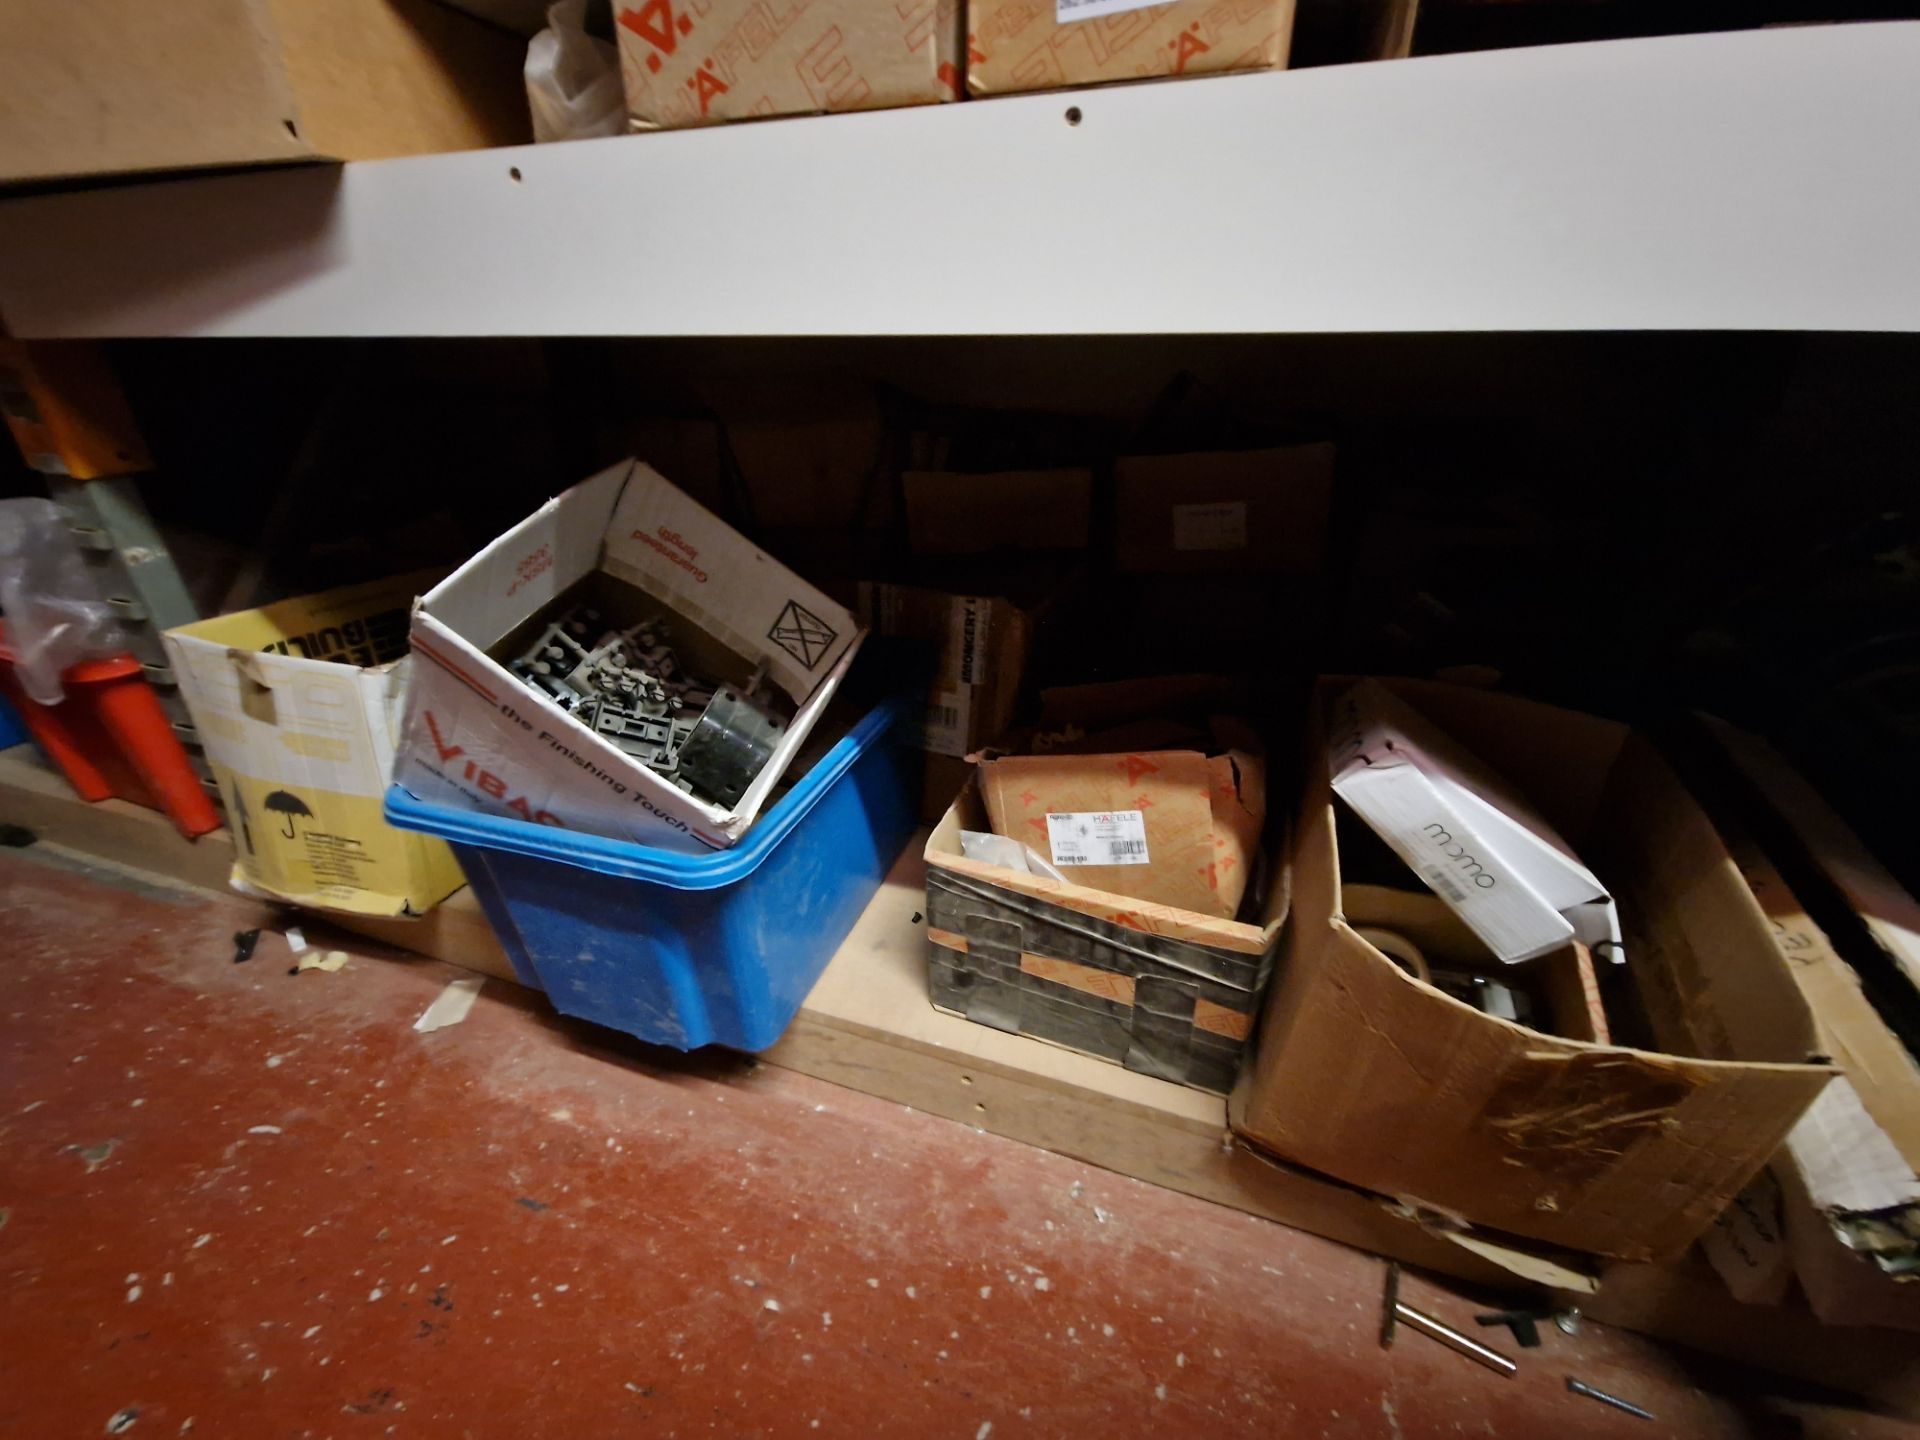 Contents to One Bay of Racking, including Fixtures, Fittings, Bolts, Drawer Runners, Bar Legs, - Image 7 of 32